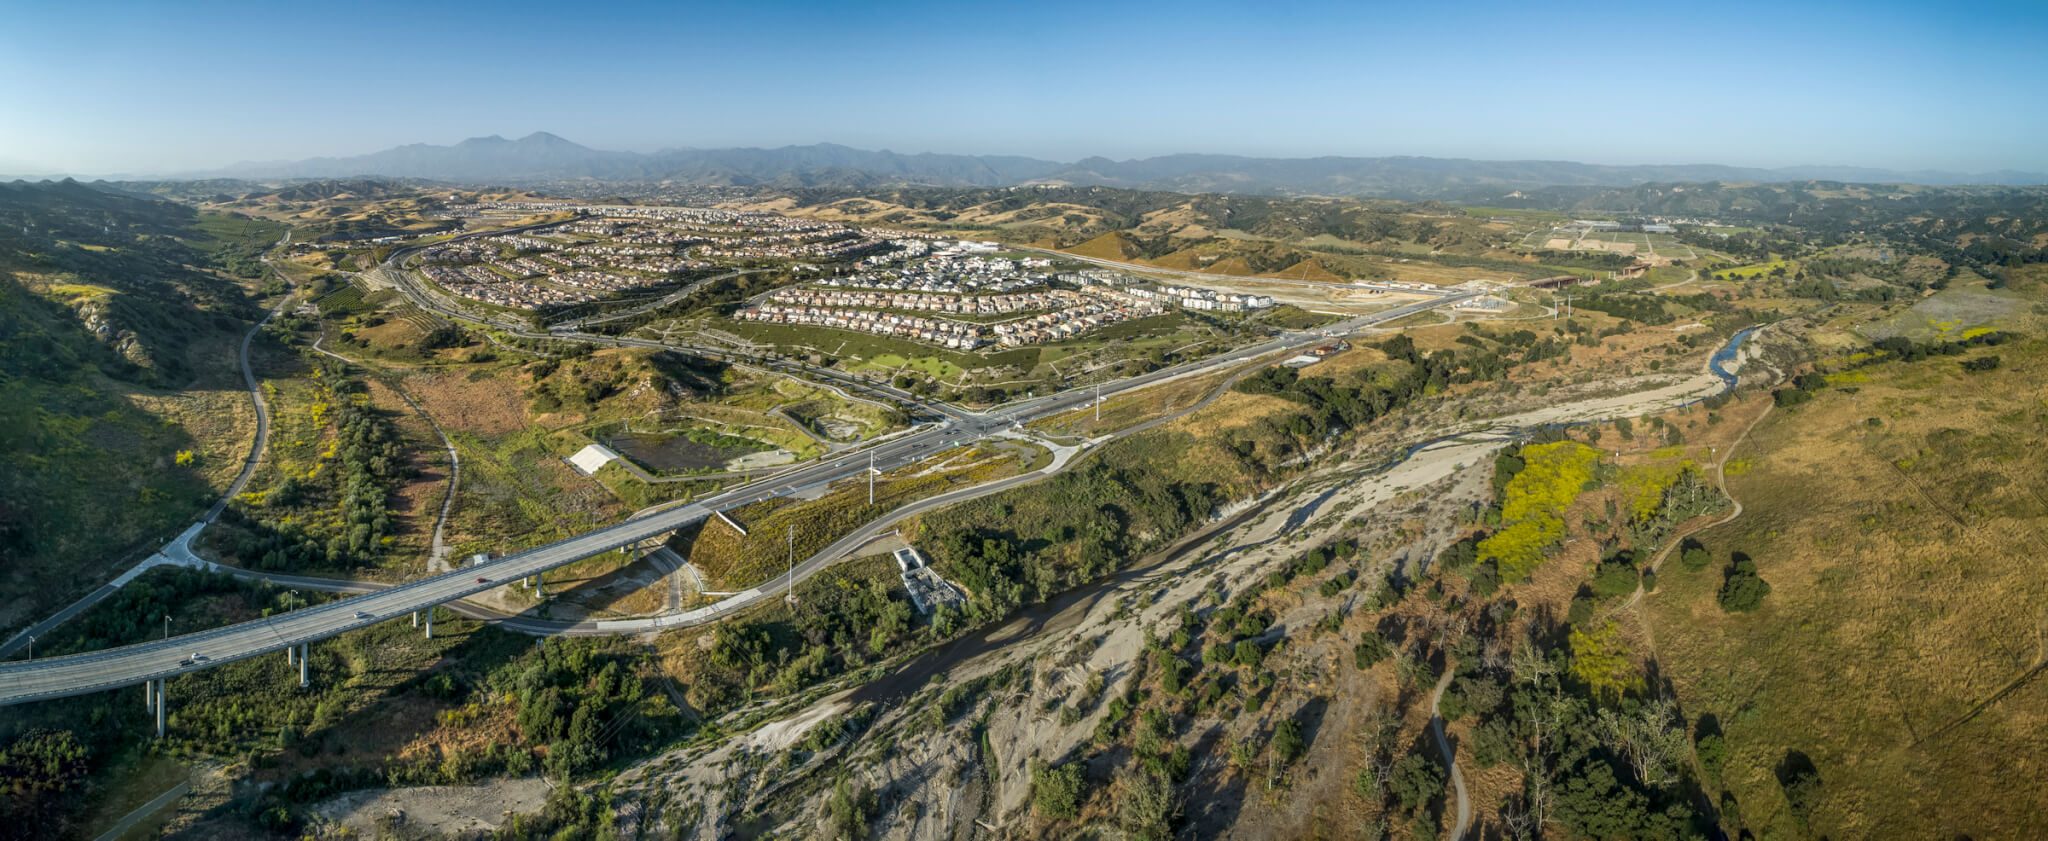 aerial view of a development in the foothills of southern california